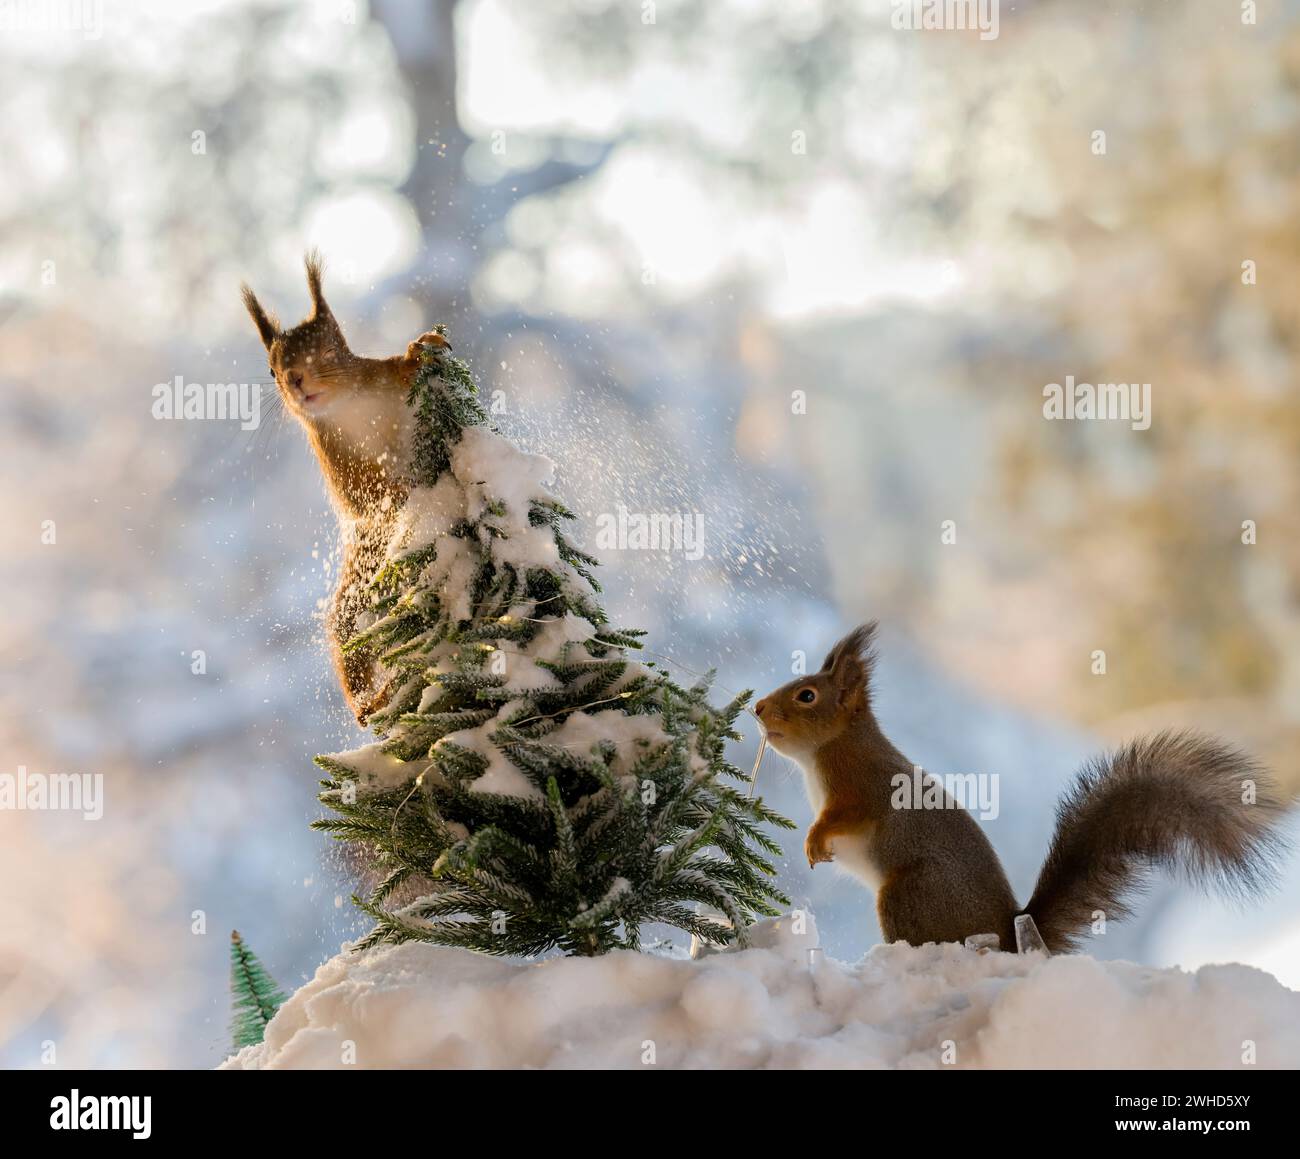 Red squirrel is climbing in a tree, another squirrel watching Stock Photo